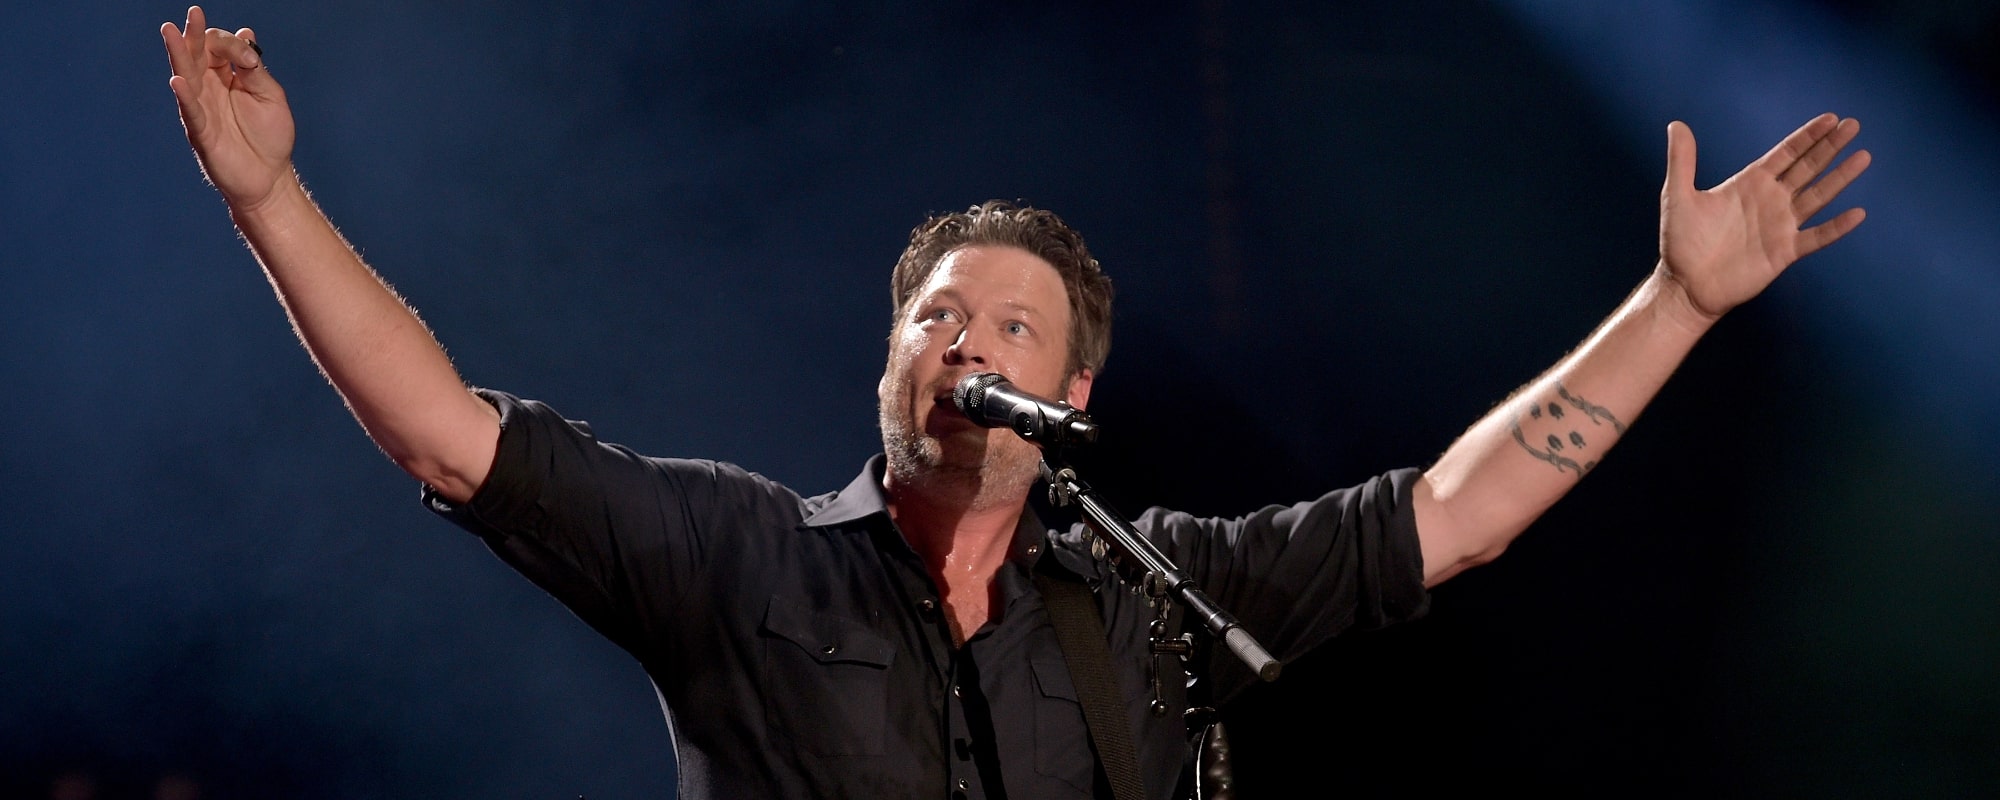 Blake Shelton Celebrates “Oklahoma Is All for the Hall” Benefit Concert With Ronnie Dunn, Vince Gill, Gwen Stefani, & More